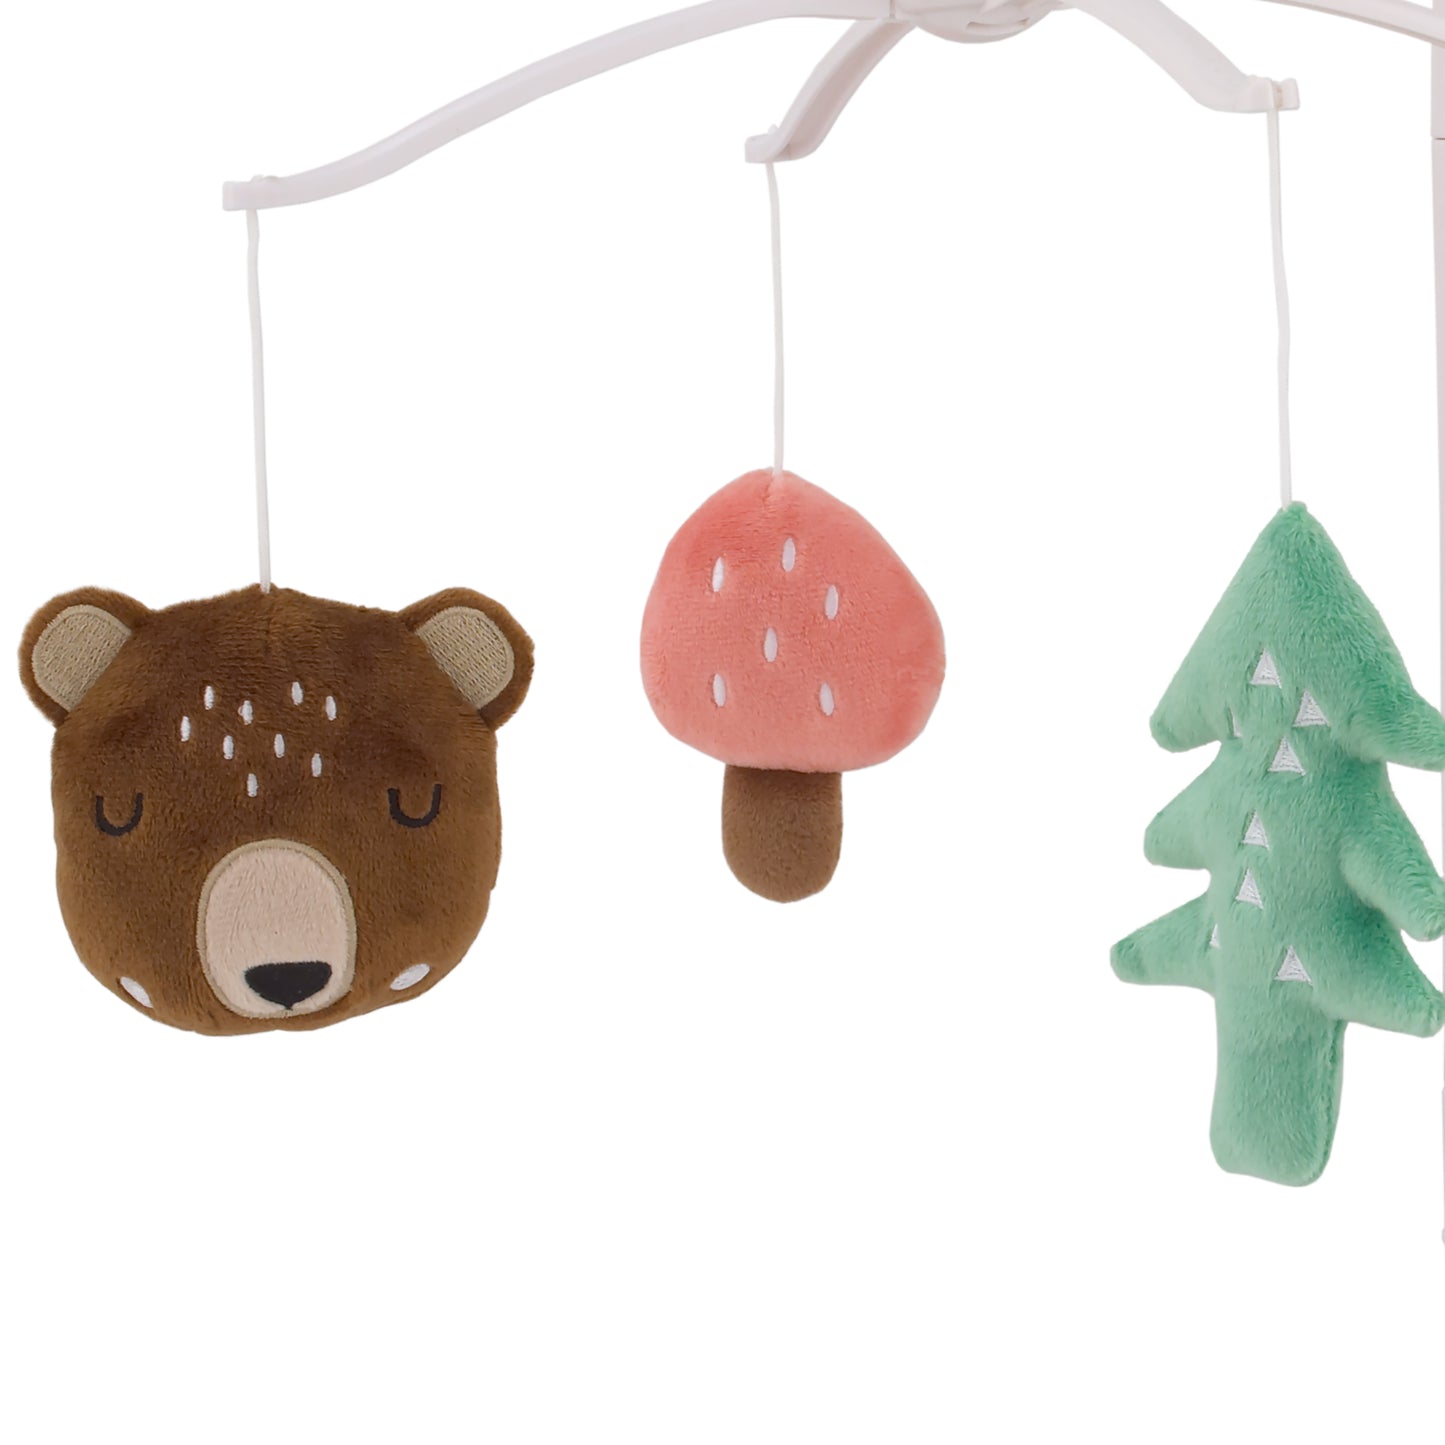 Little Love by NoJo Retro Happy Camper Orange, Brown and Green Forest Nursery Crib Musical Mobile with Bear, Fox, Mushroom and Pine tree